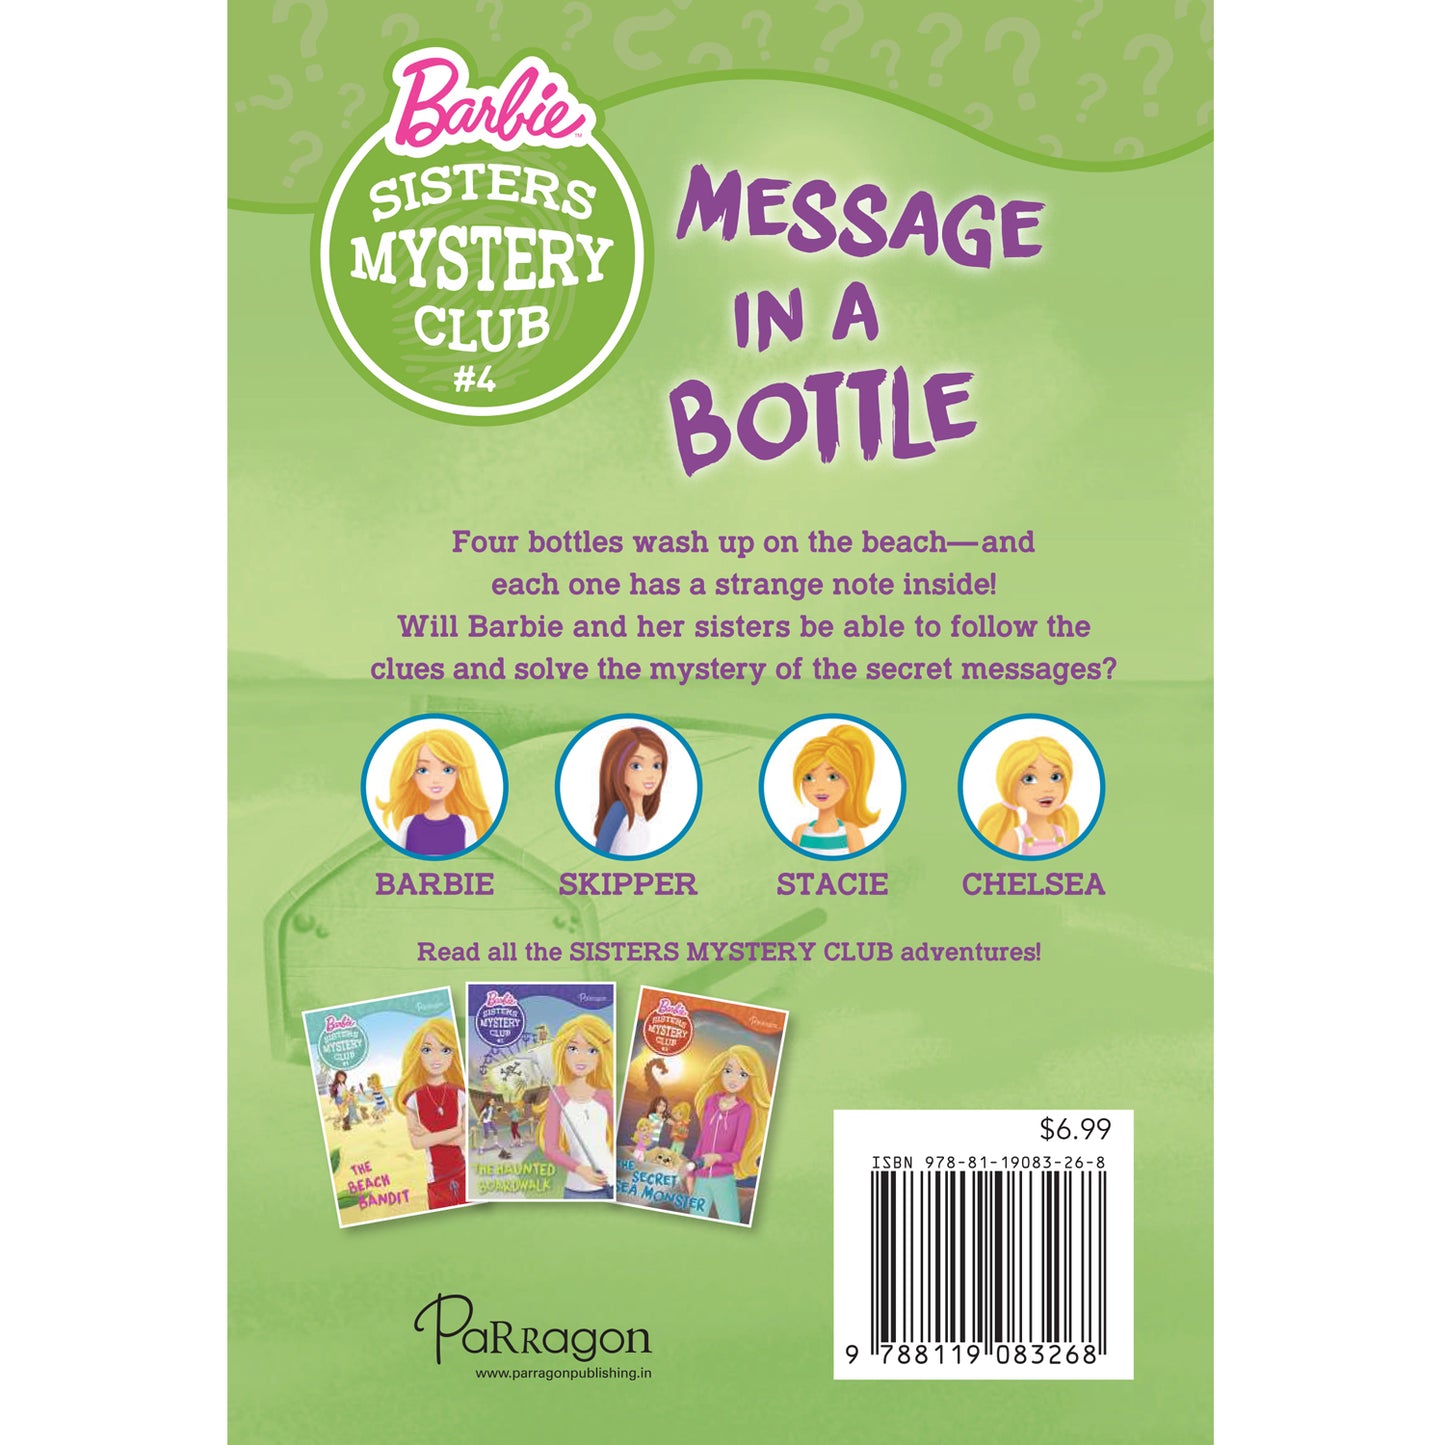 Barbie Sister Mystery Club 4: Message in a Bottle